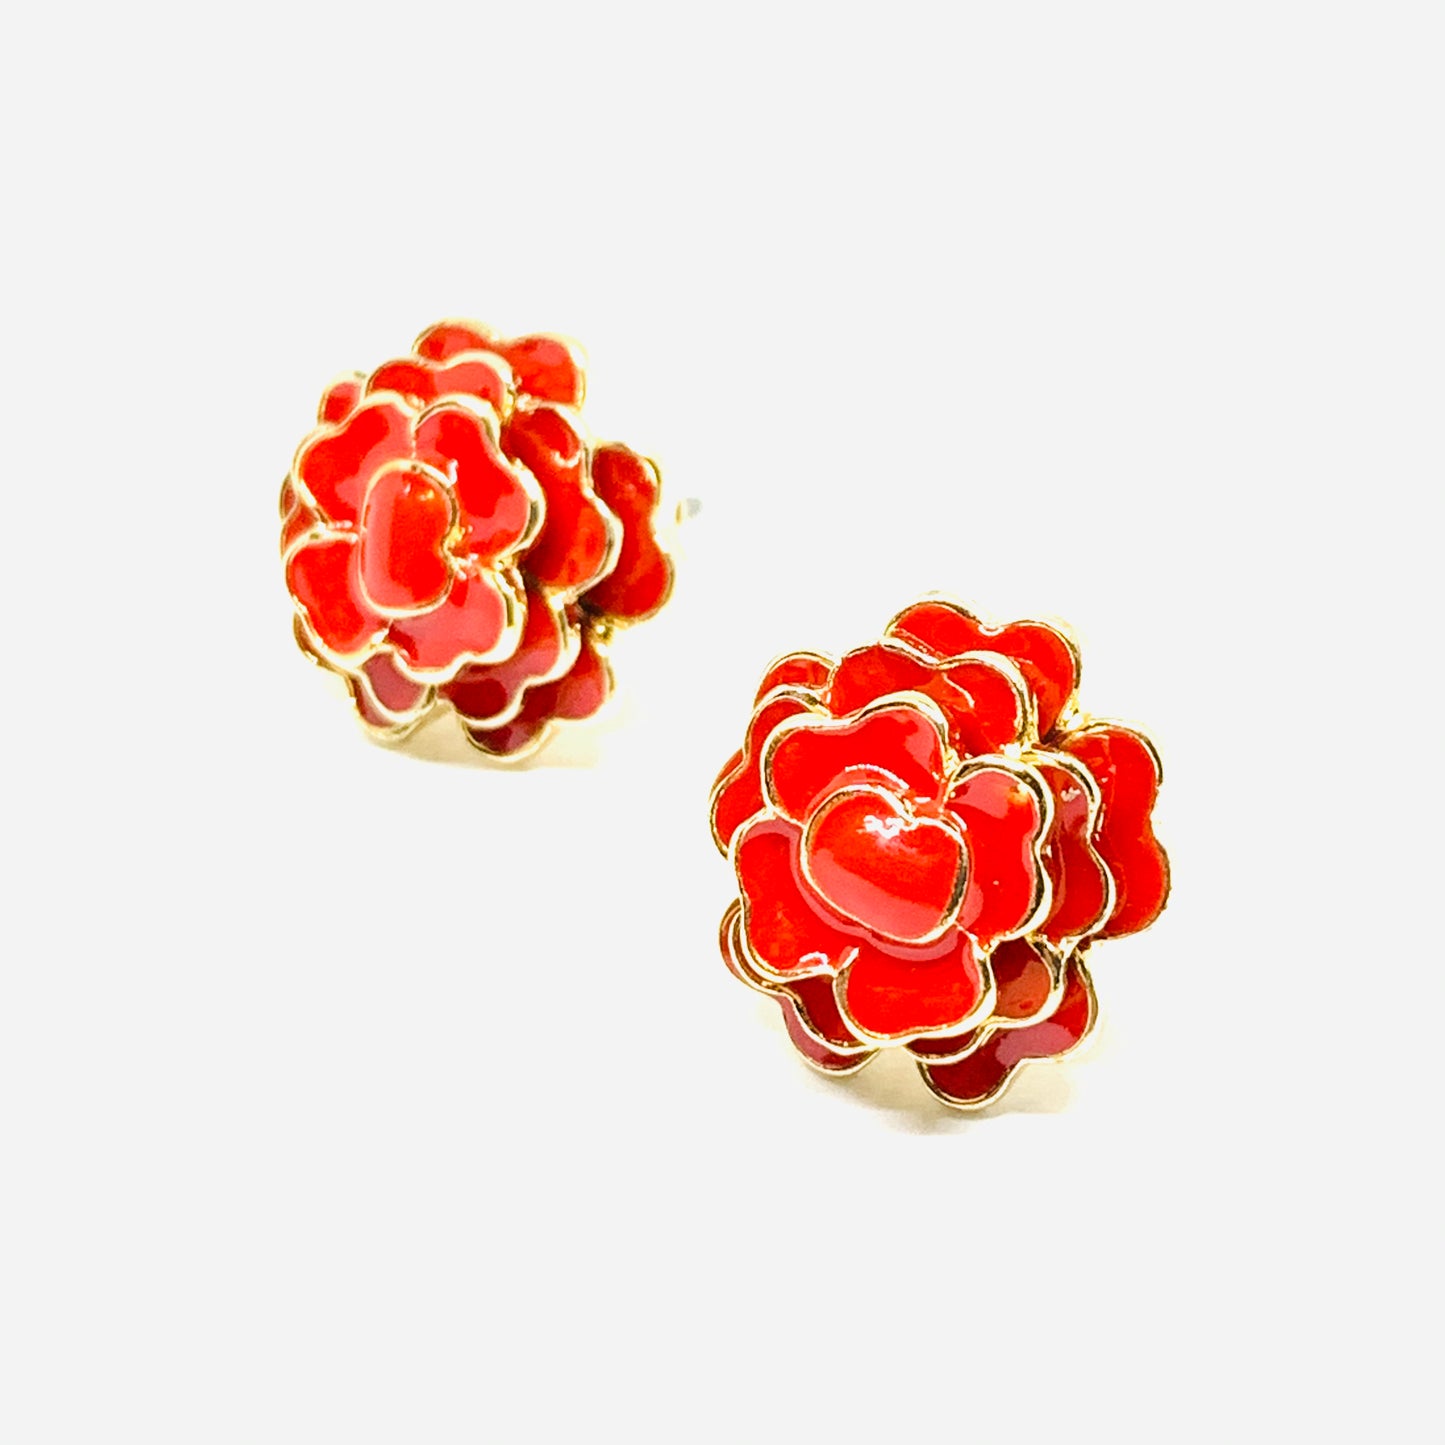 Stud red rose enamel mexican earrings jewelry with golden edges. Frida Kahlo inspired accessories.